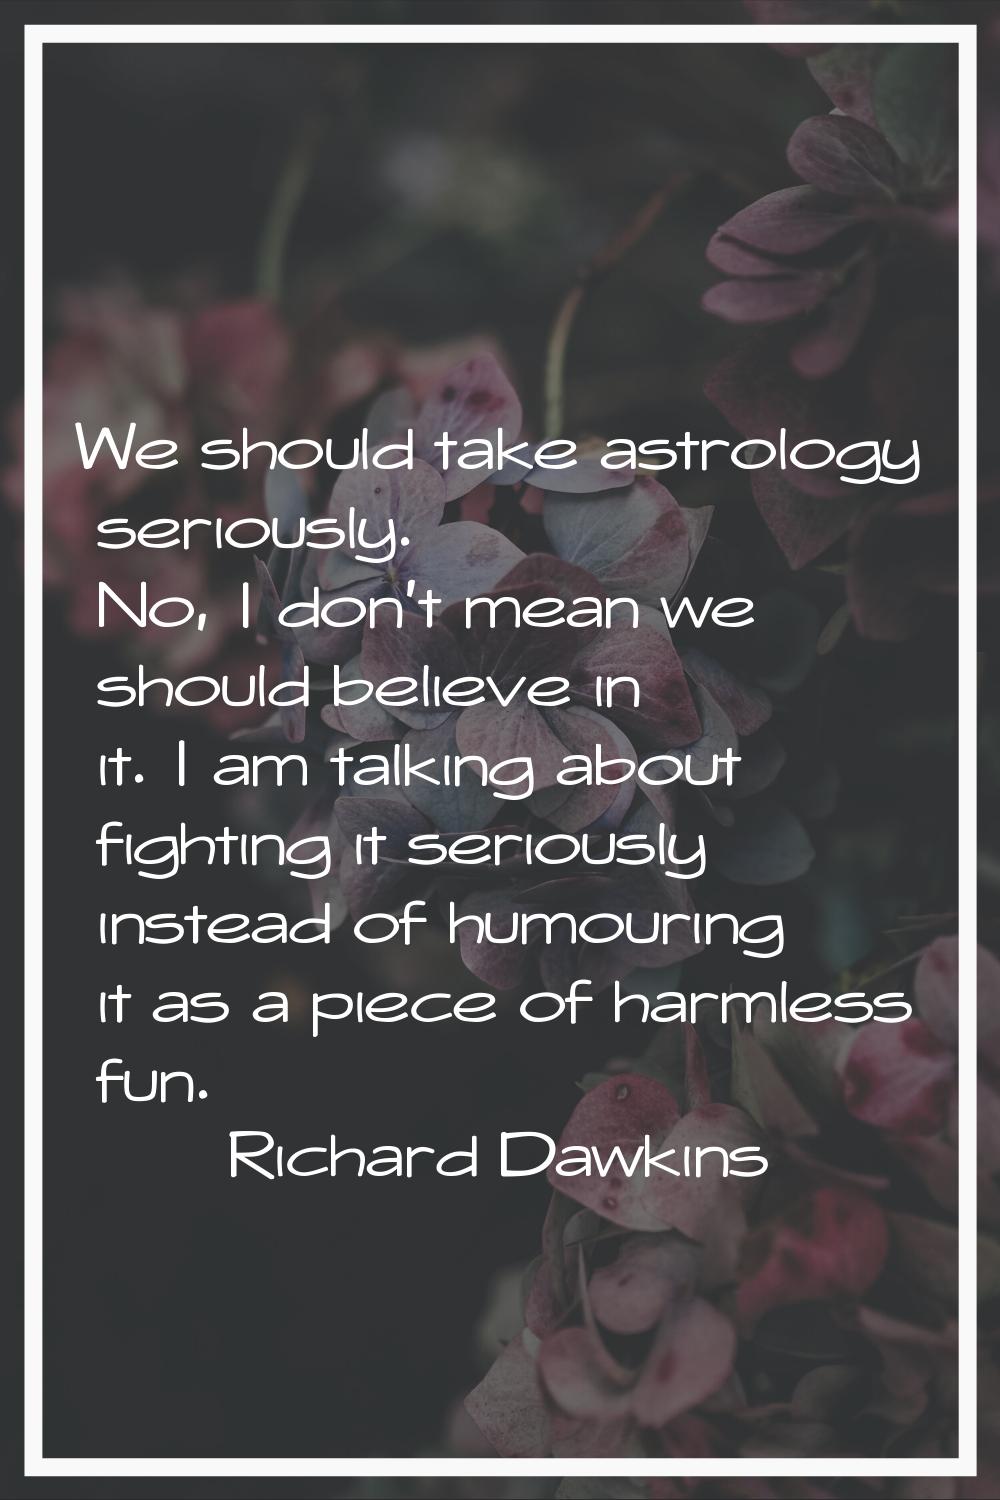 We should take astrology seriously. No, I don't mean we should believe in it. I am talking about fi